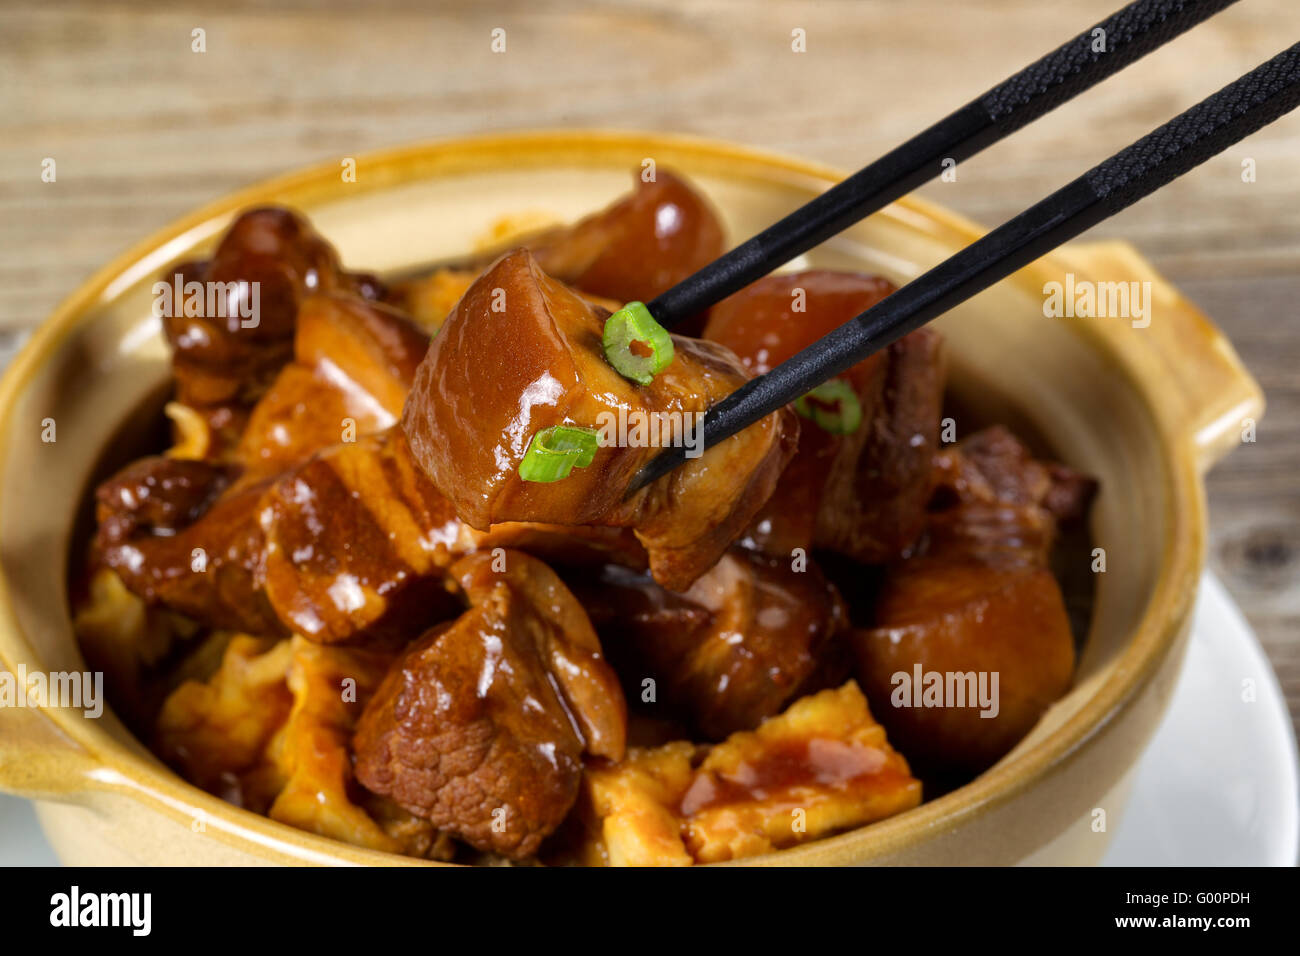 Beef Stew with green onions ready to eat Stock Photo